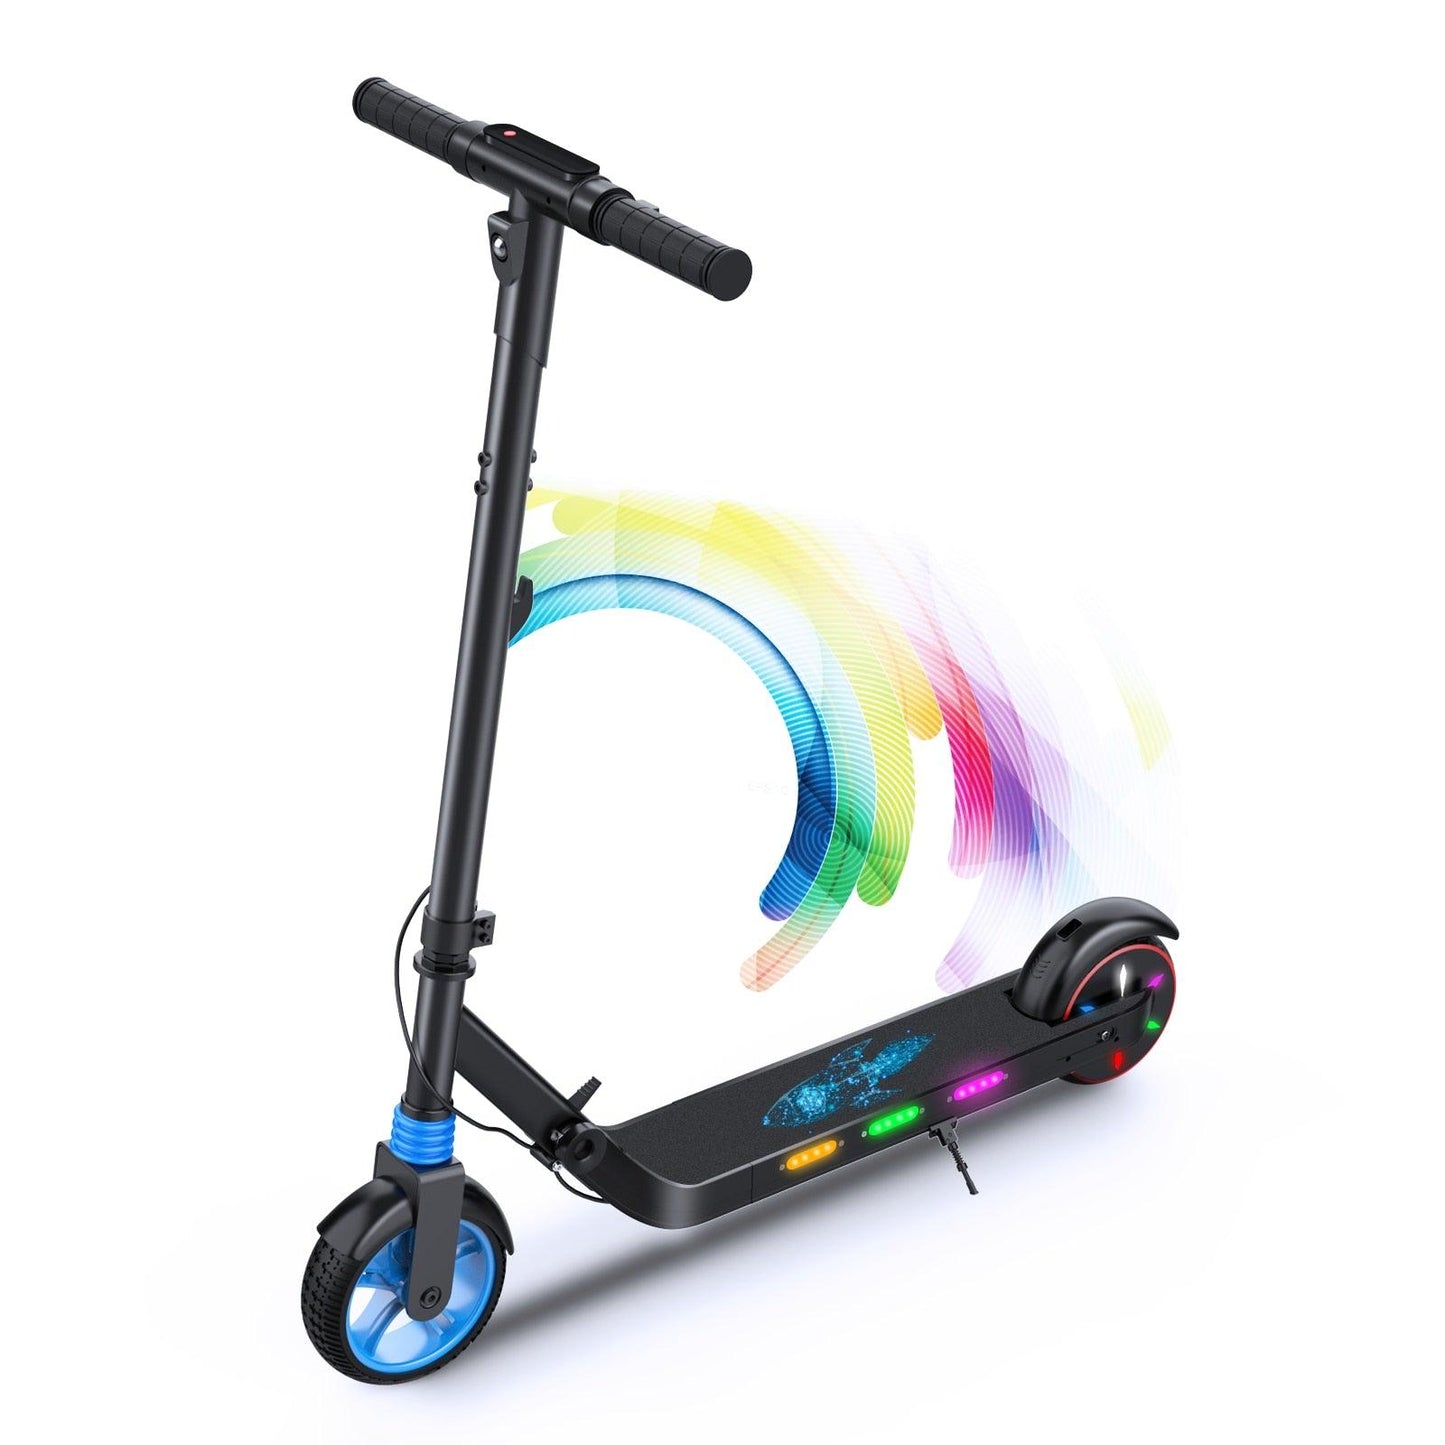 KES1 Electric Scooter for Kids/Folding Kids E-Scooter wt Bluetooth Audio - The GoatFind